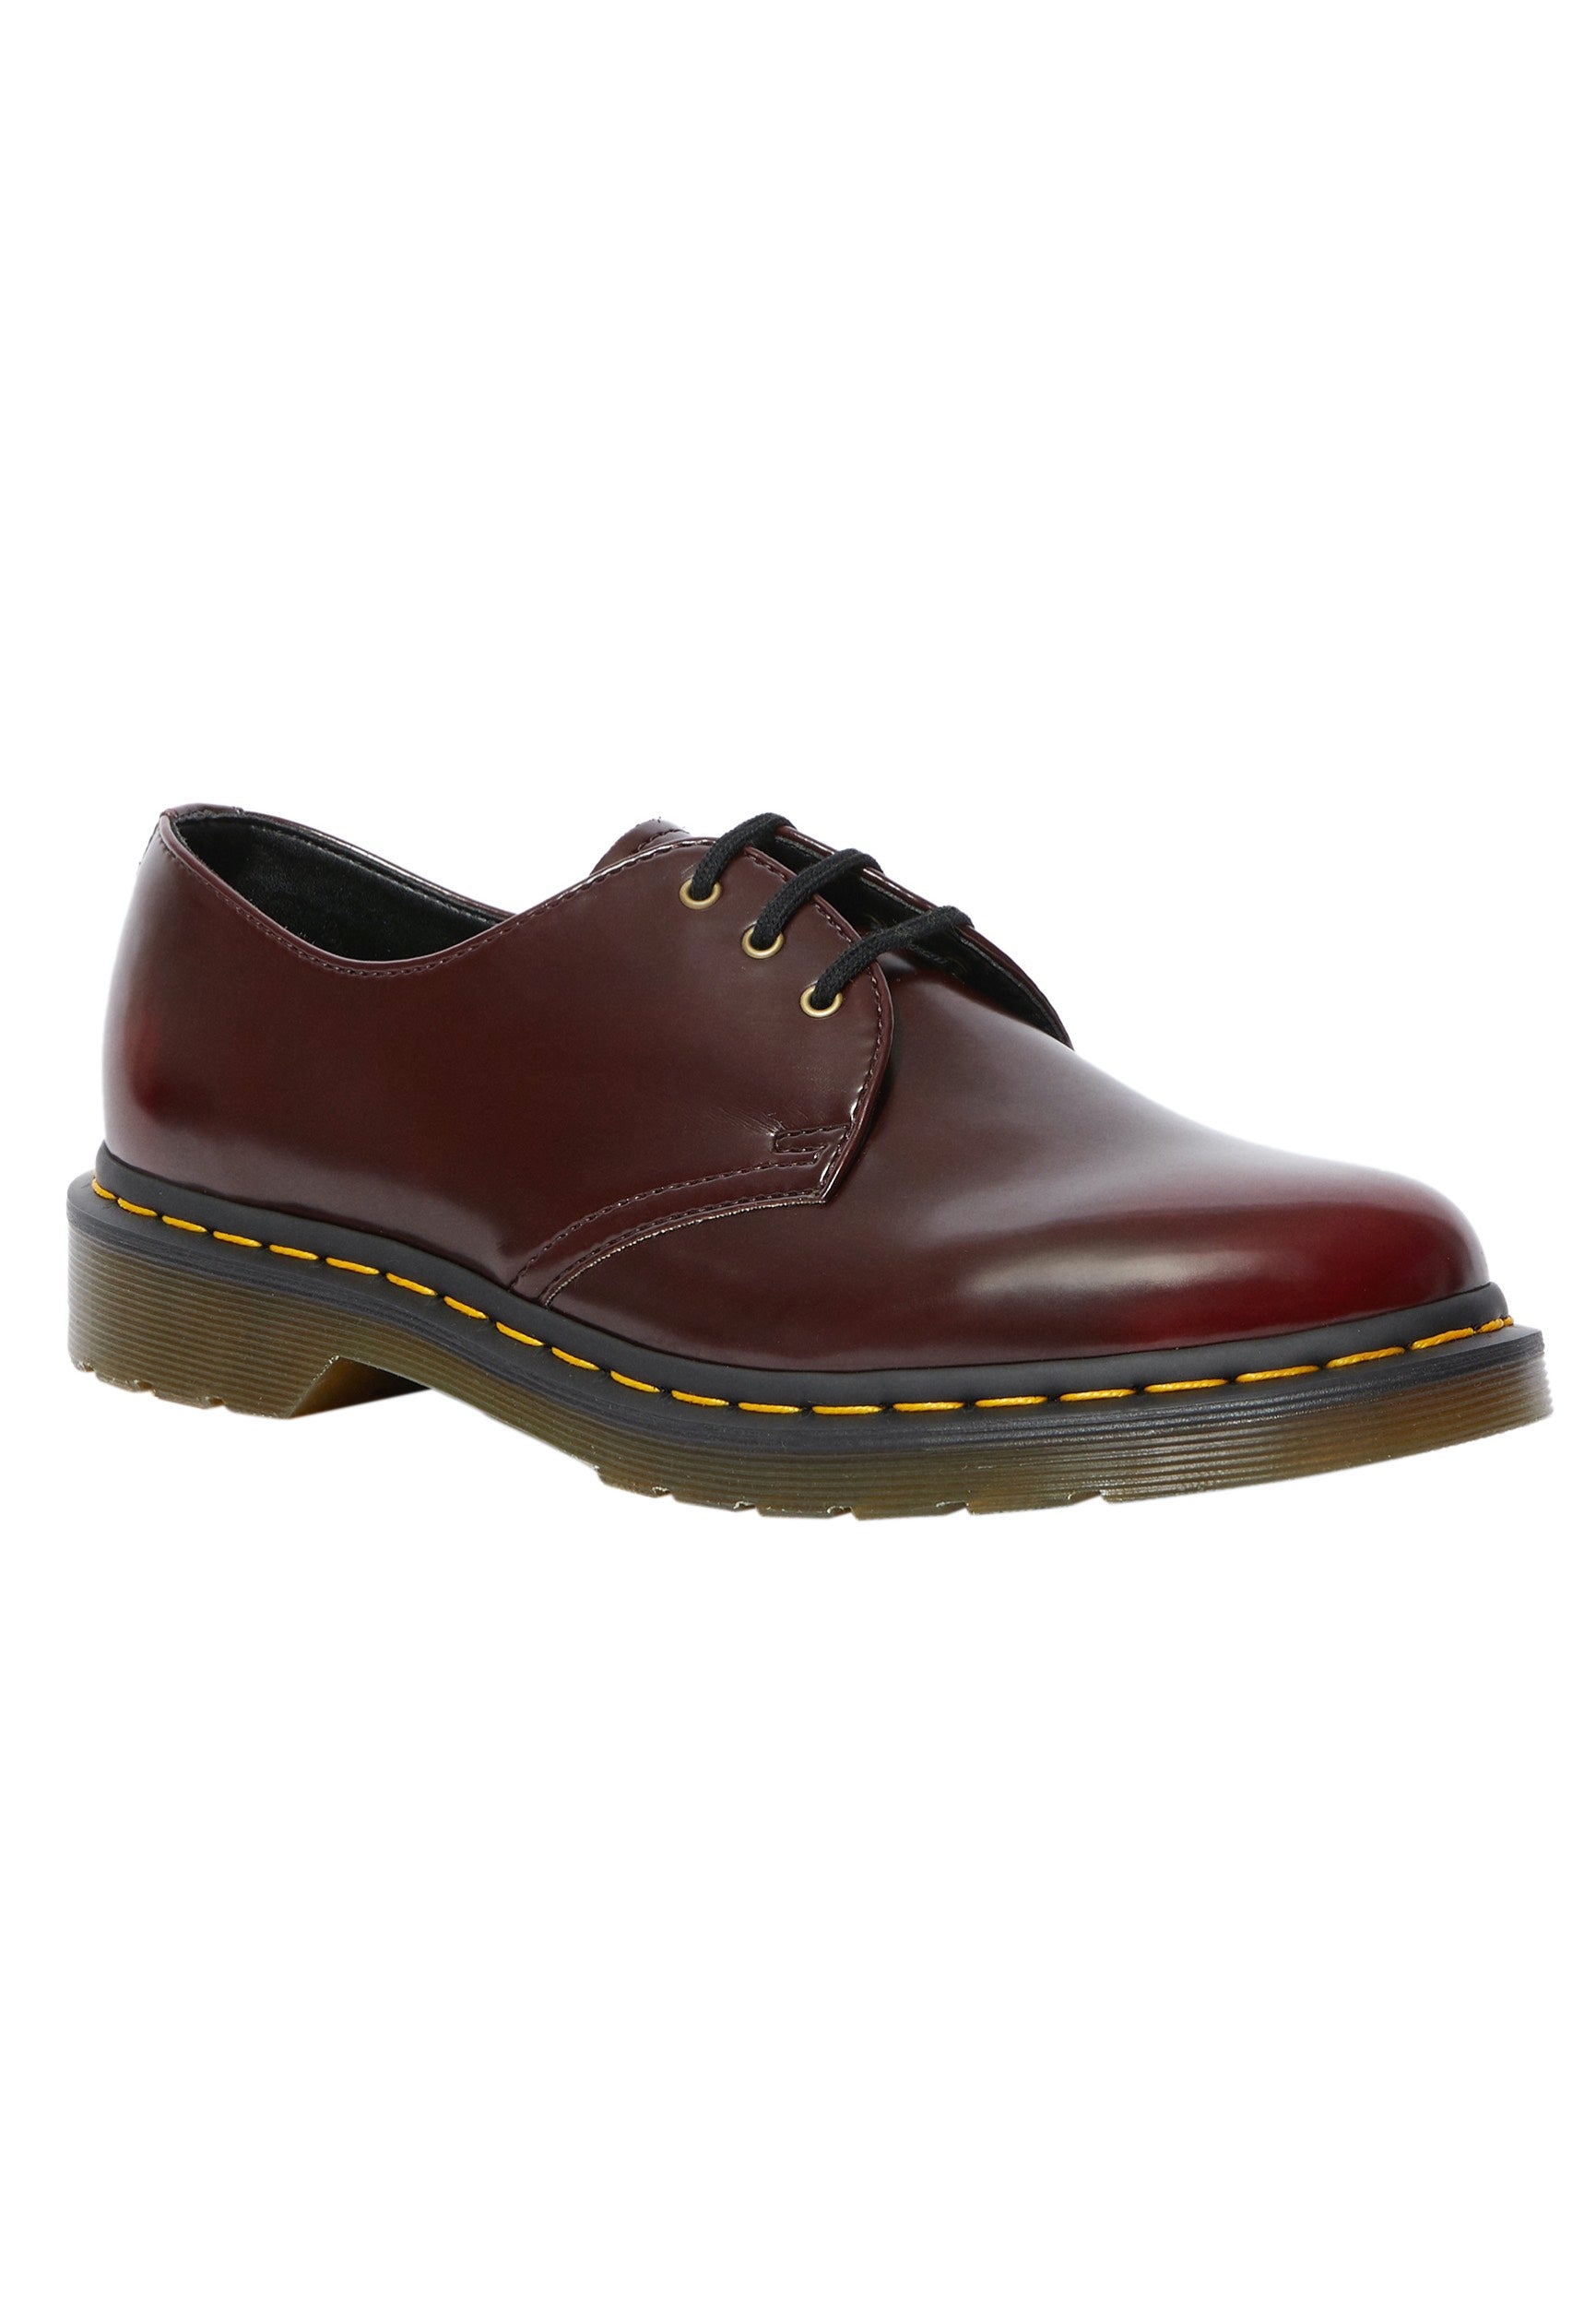 Dr. Martens - Vegan 1461 Cherry Red Oxford Rub Off - Shoes